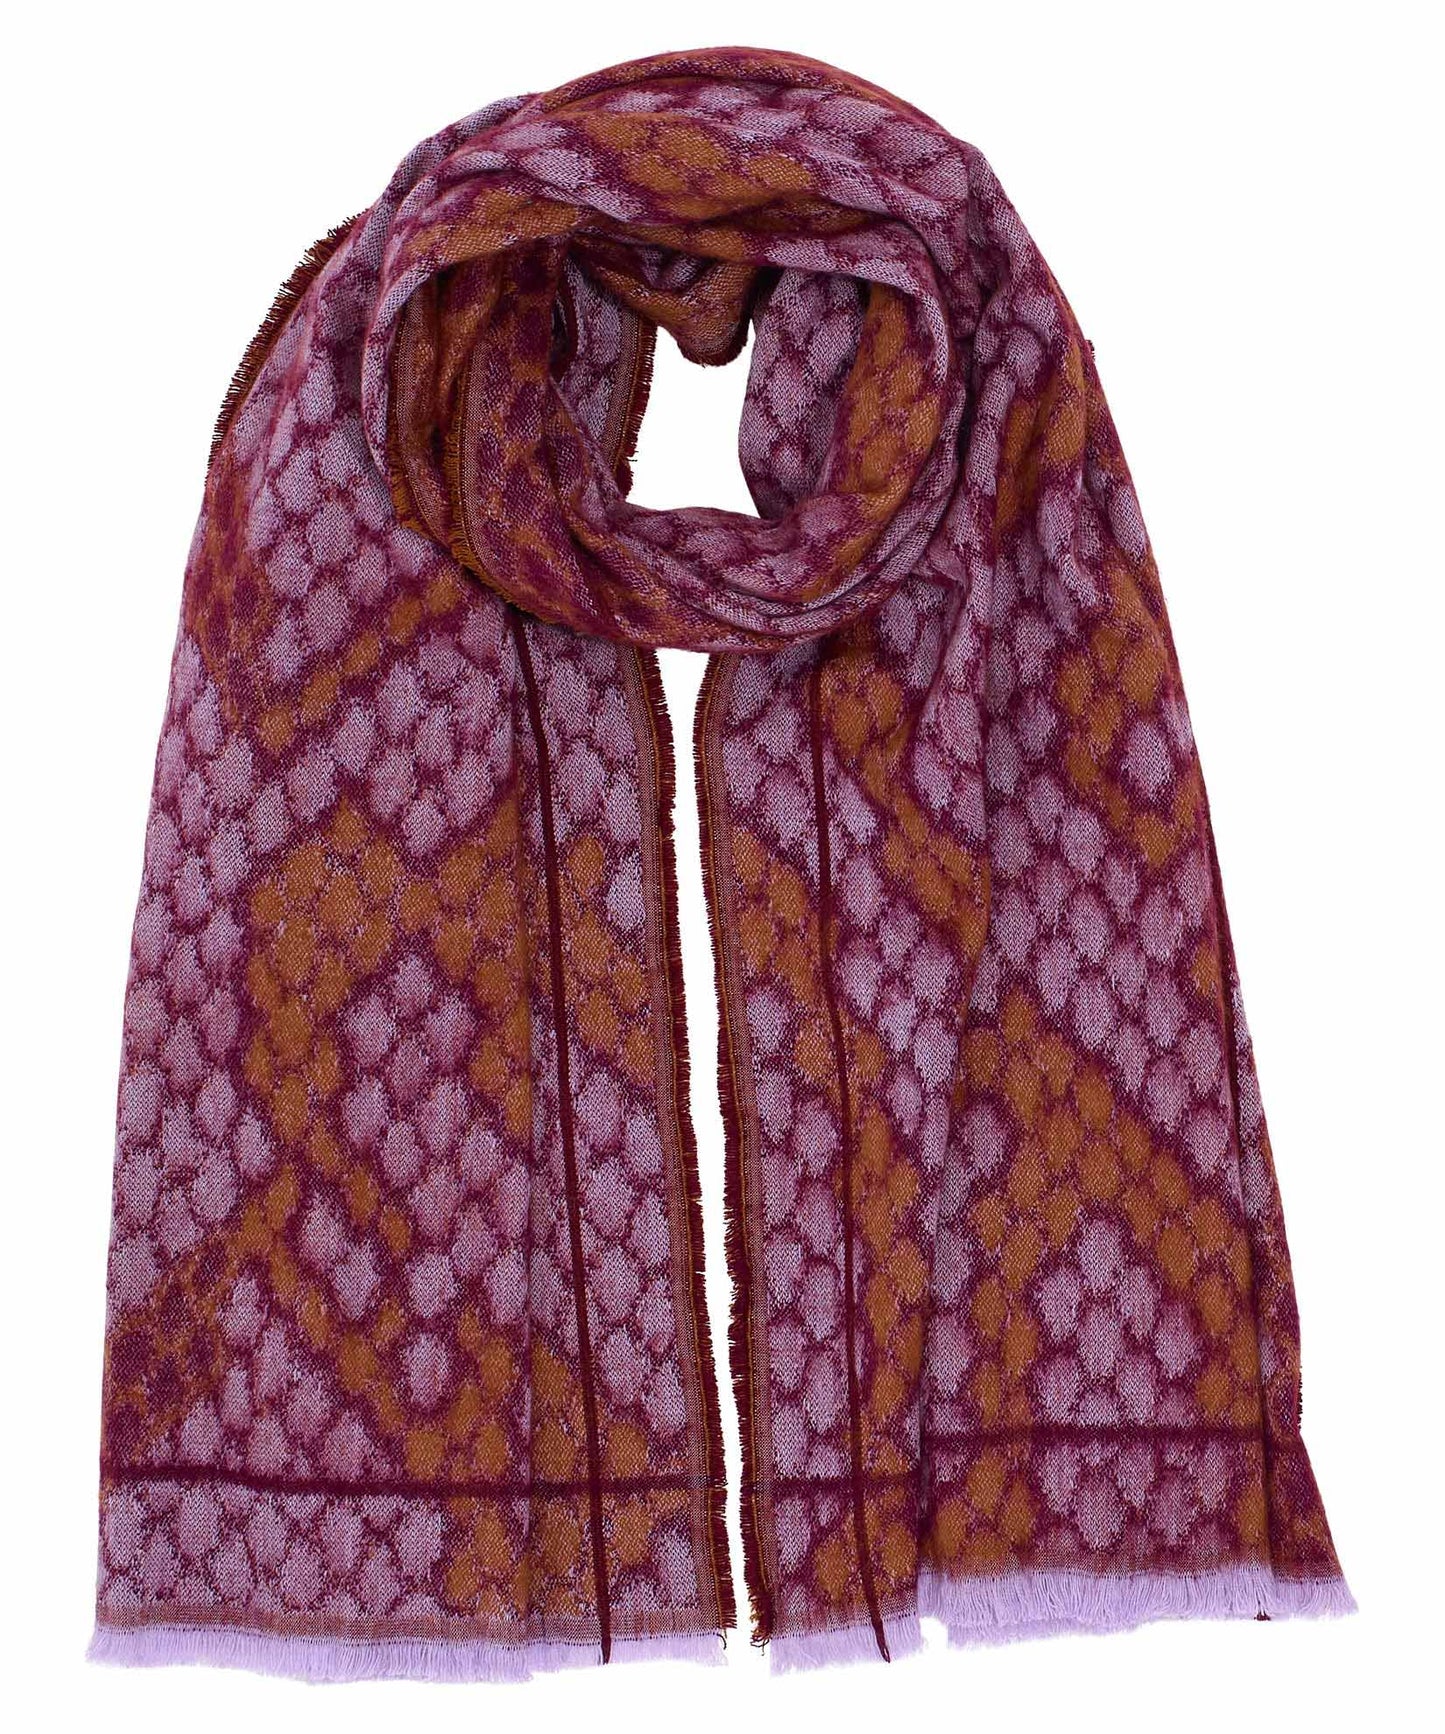 Python Jacquard Scarf in color Lilac